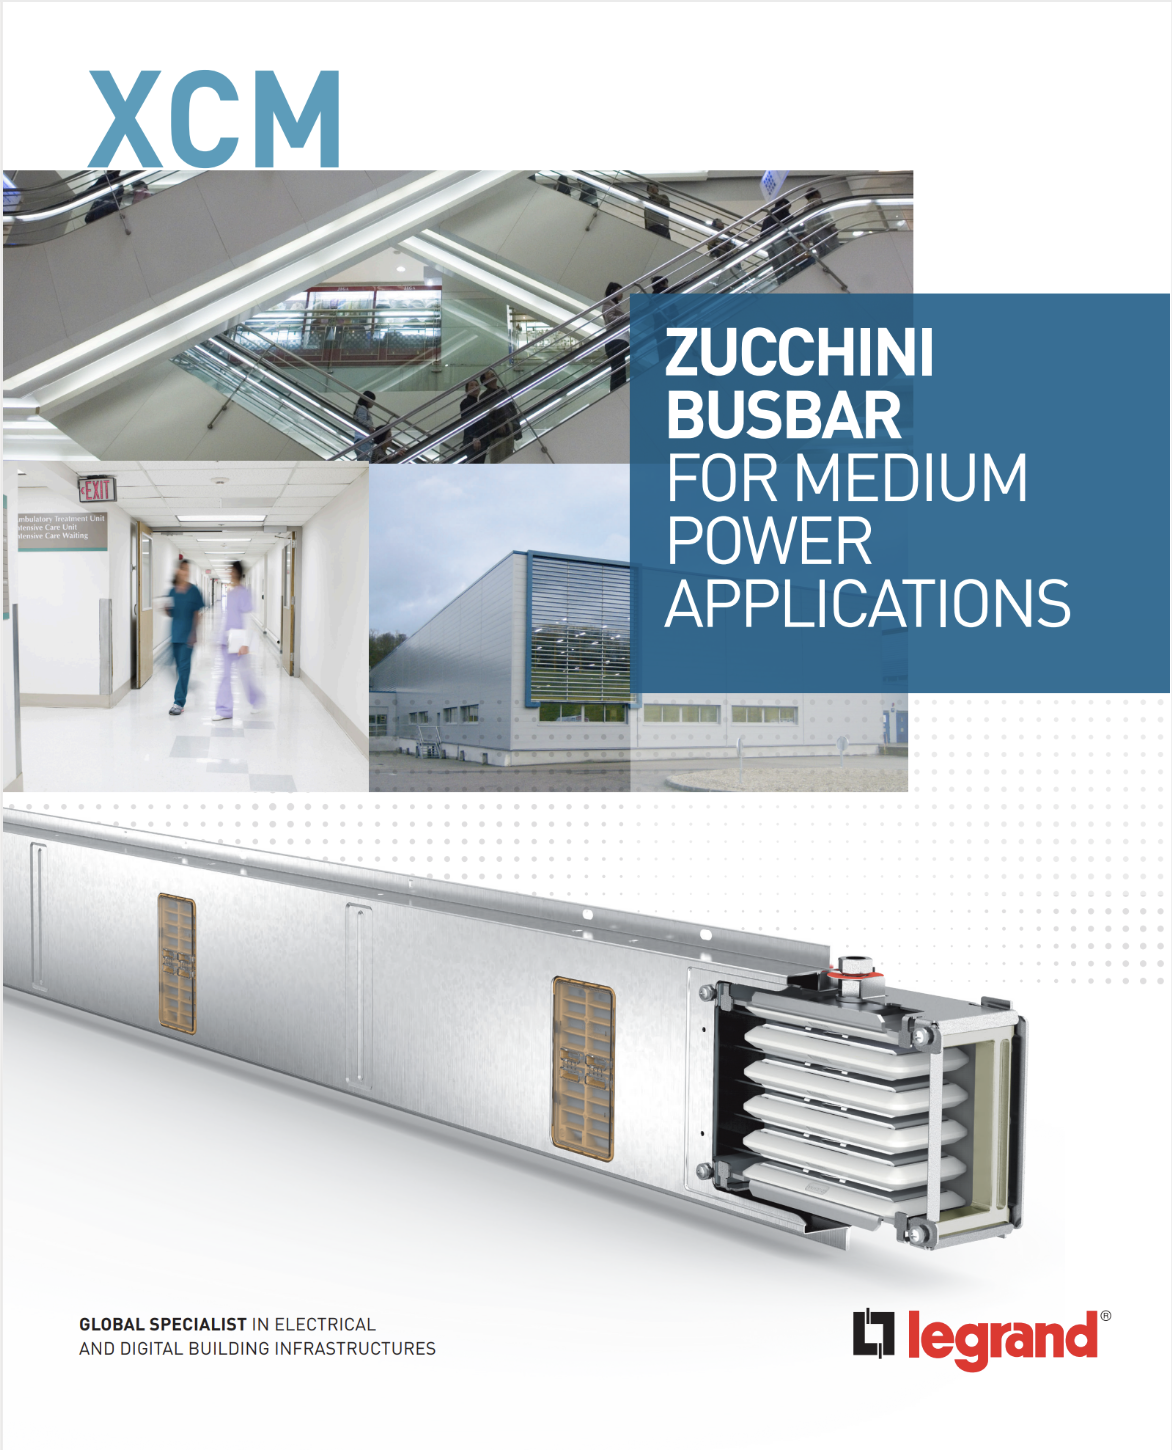 Cover of XCM busbar catalogue.